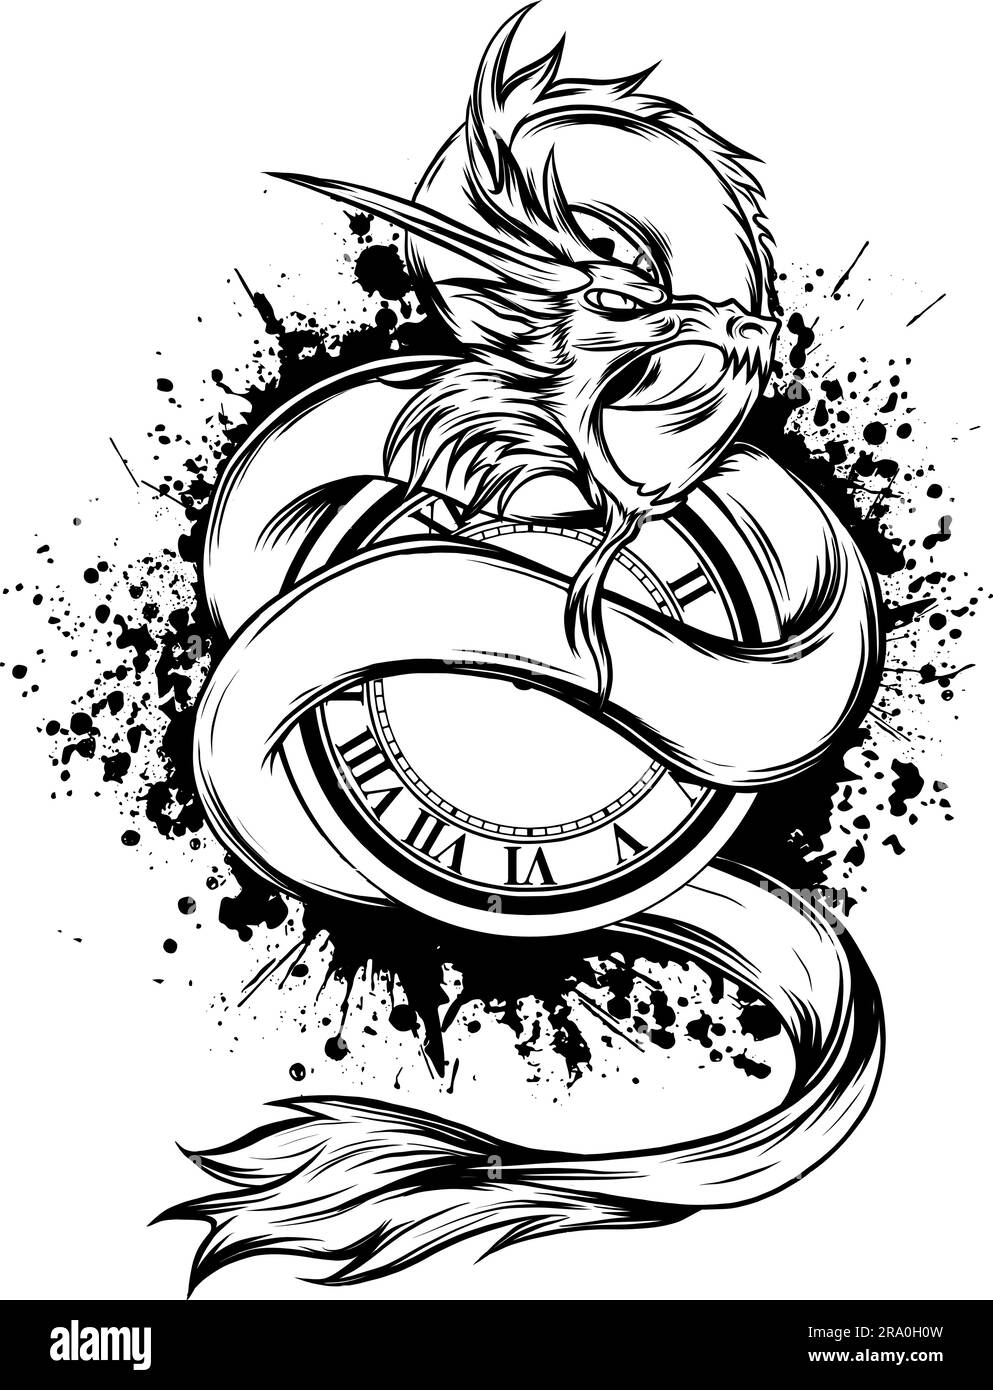 dragon hand drawn vector illustration in Black and white Stock Vector